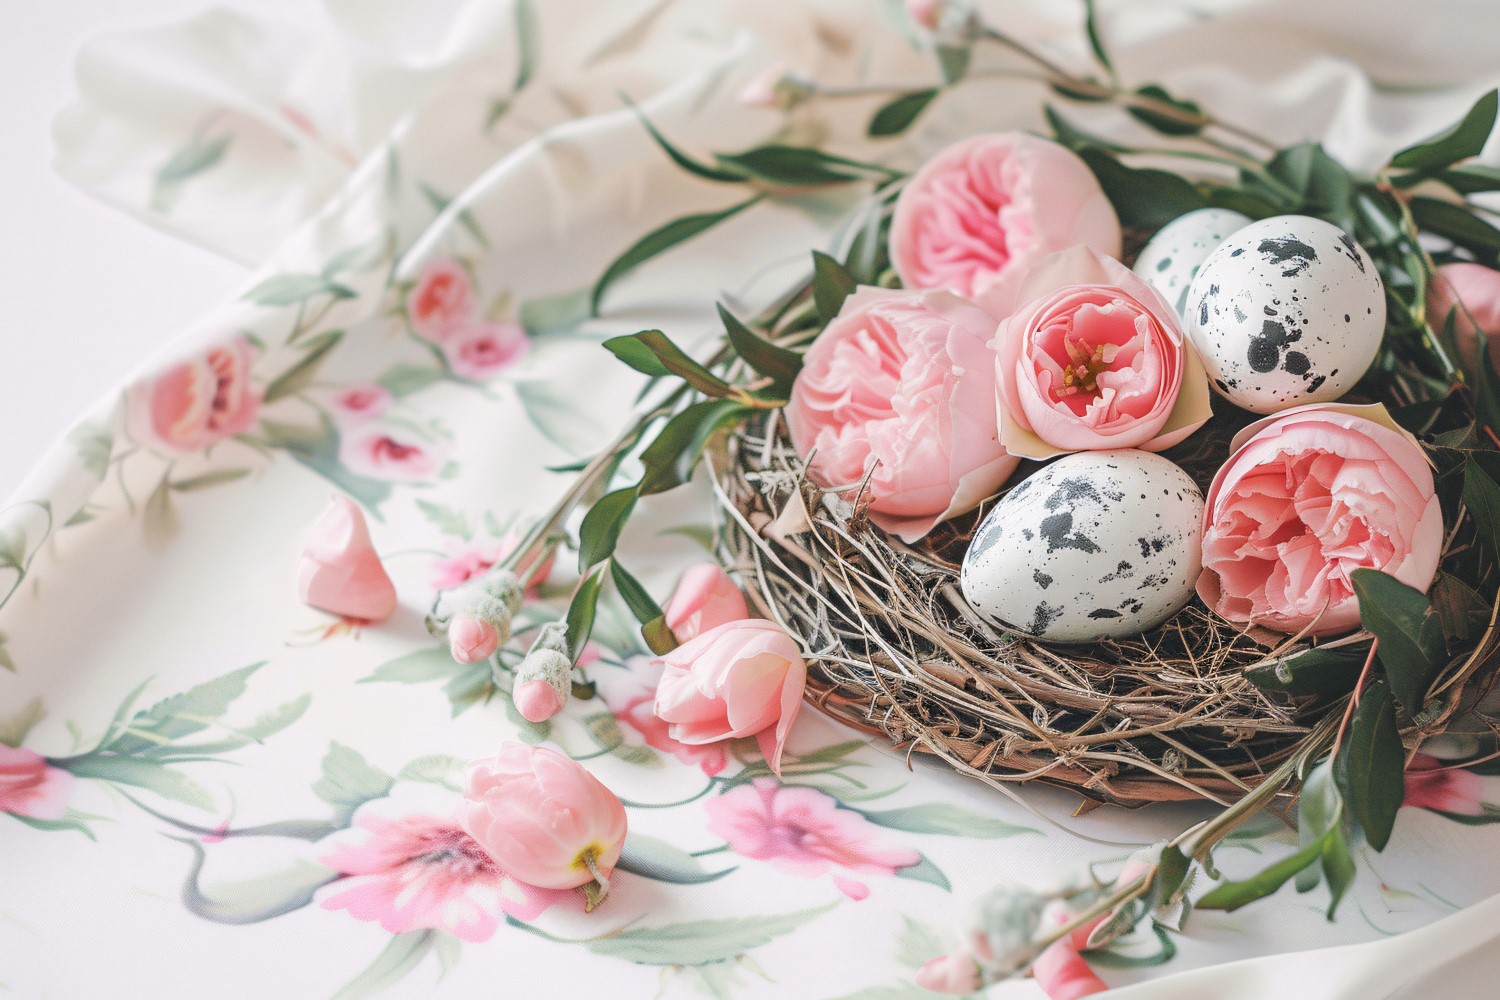 Easter decoration with flowers and eggs in birds nest 219